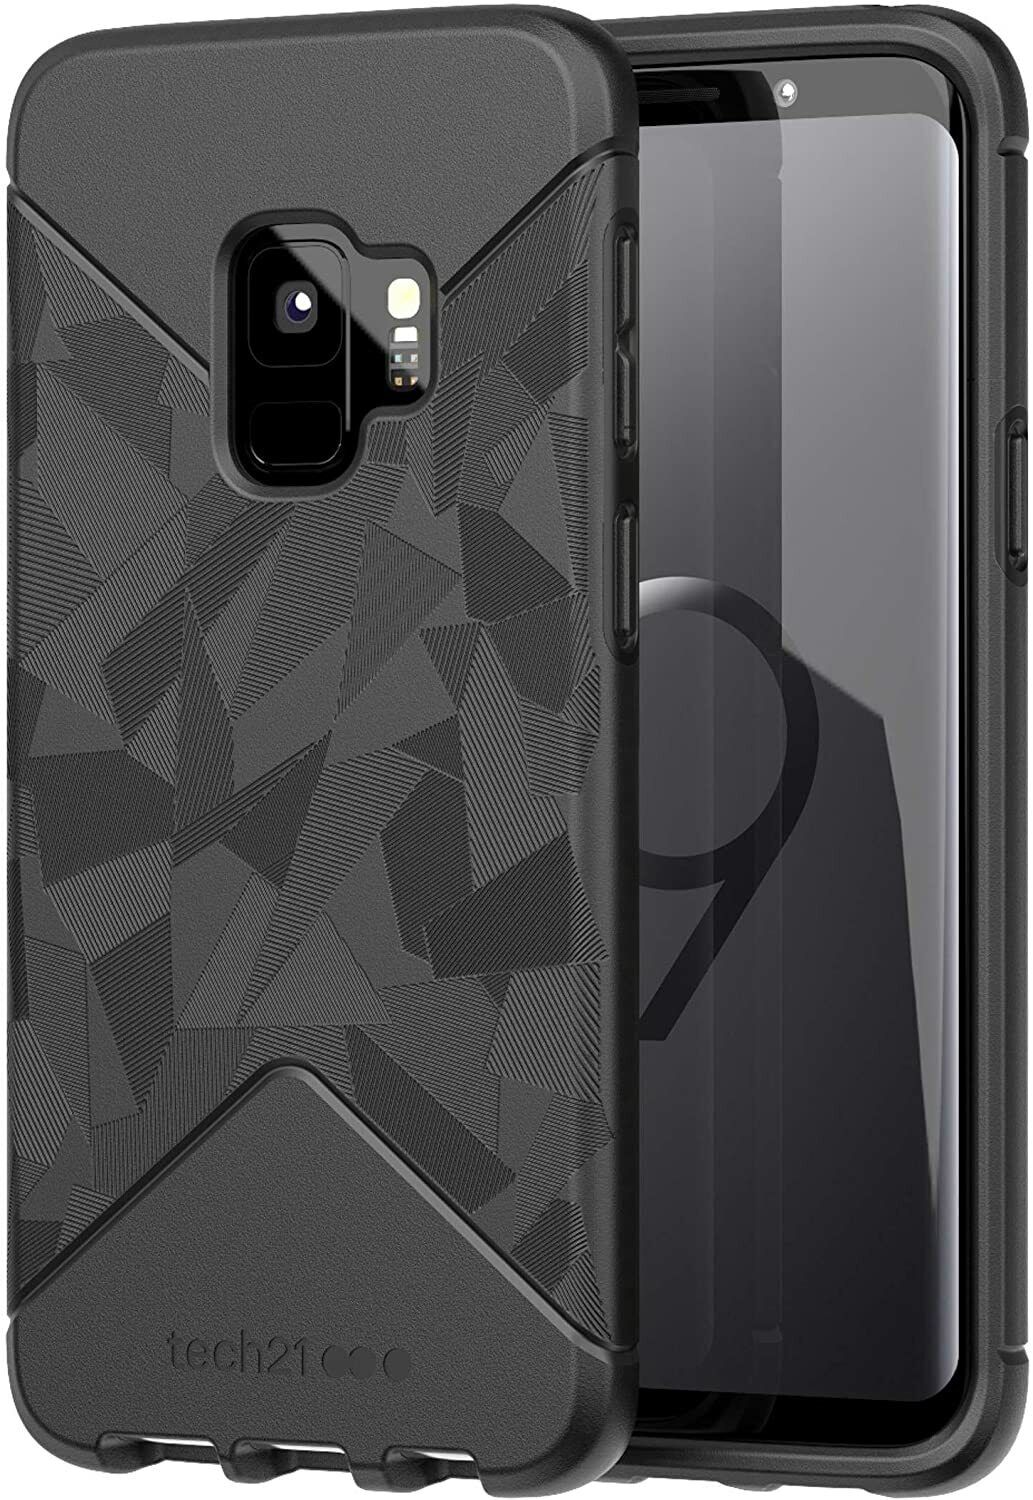 Genuine Tech21 EvoTactical Black Case Cover For Samsung Galaxy S9